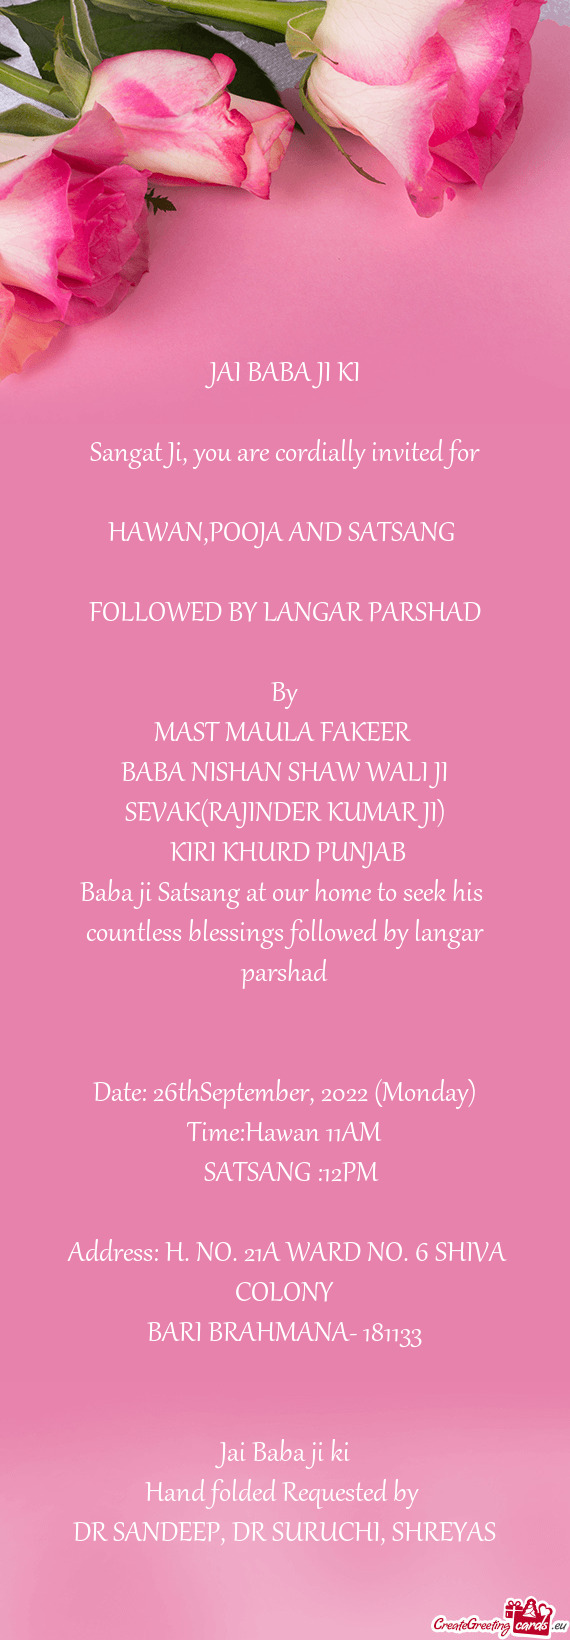 Sangat Ji, you are cordially invited for